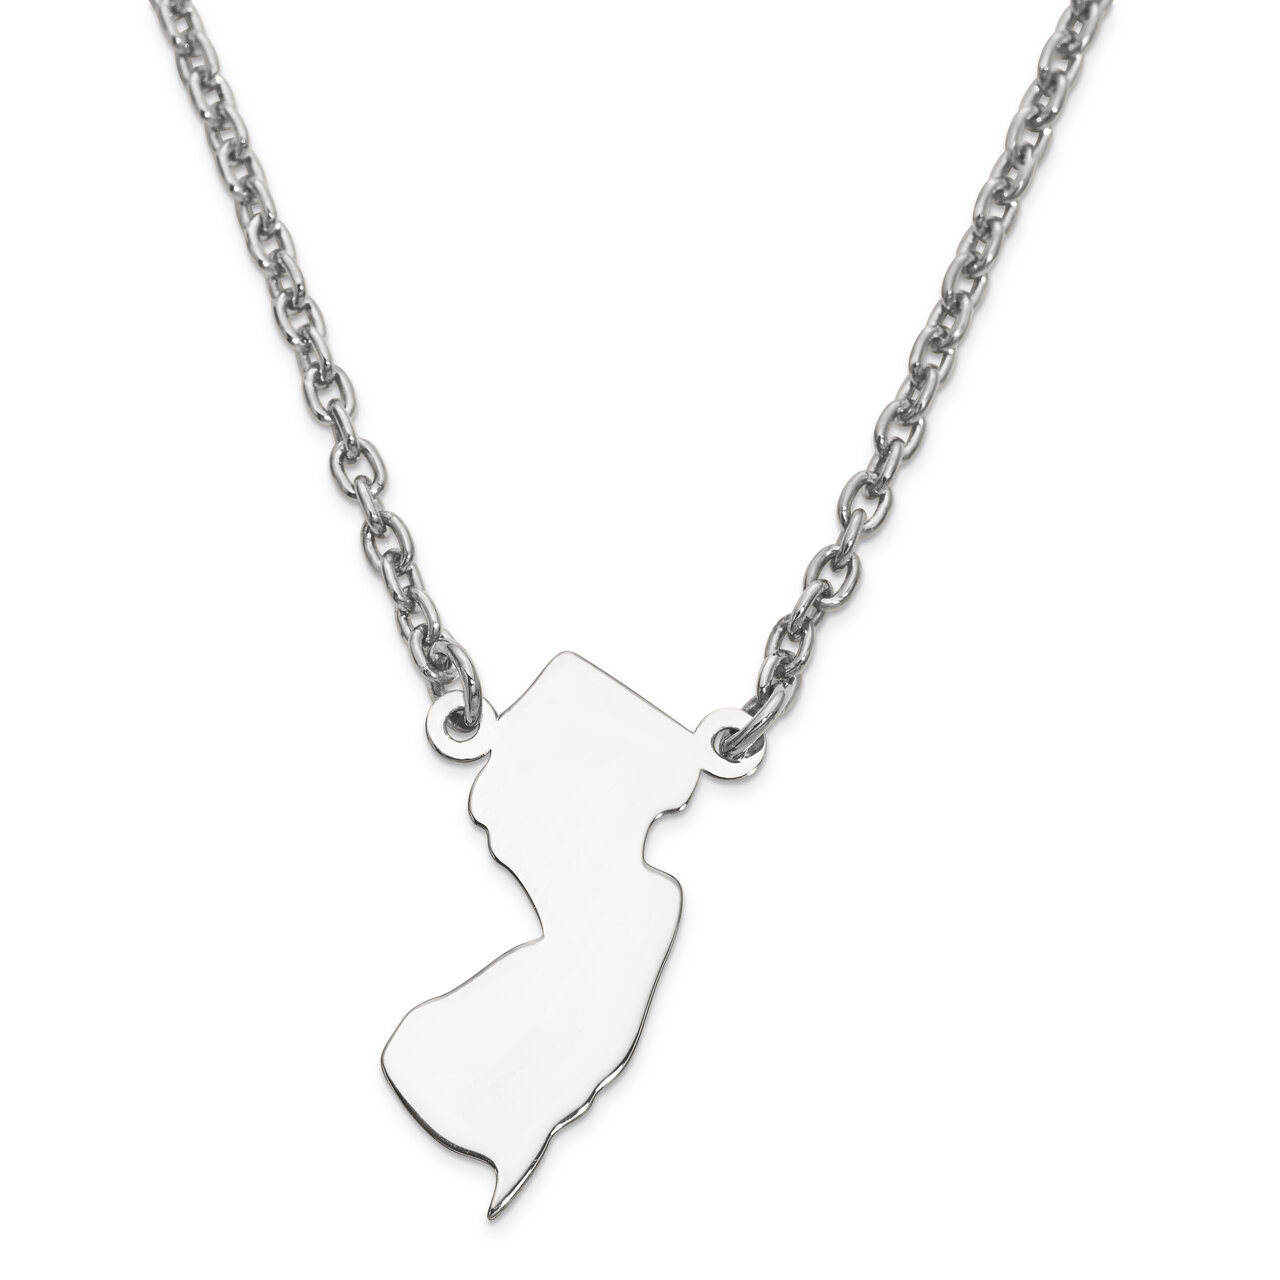 New Jersey State Pendant Necklace with Chain 14k White Gold Engravable XNA706W-NJ